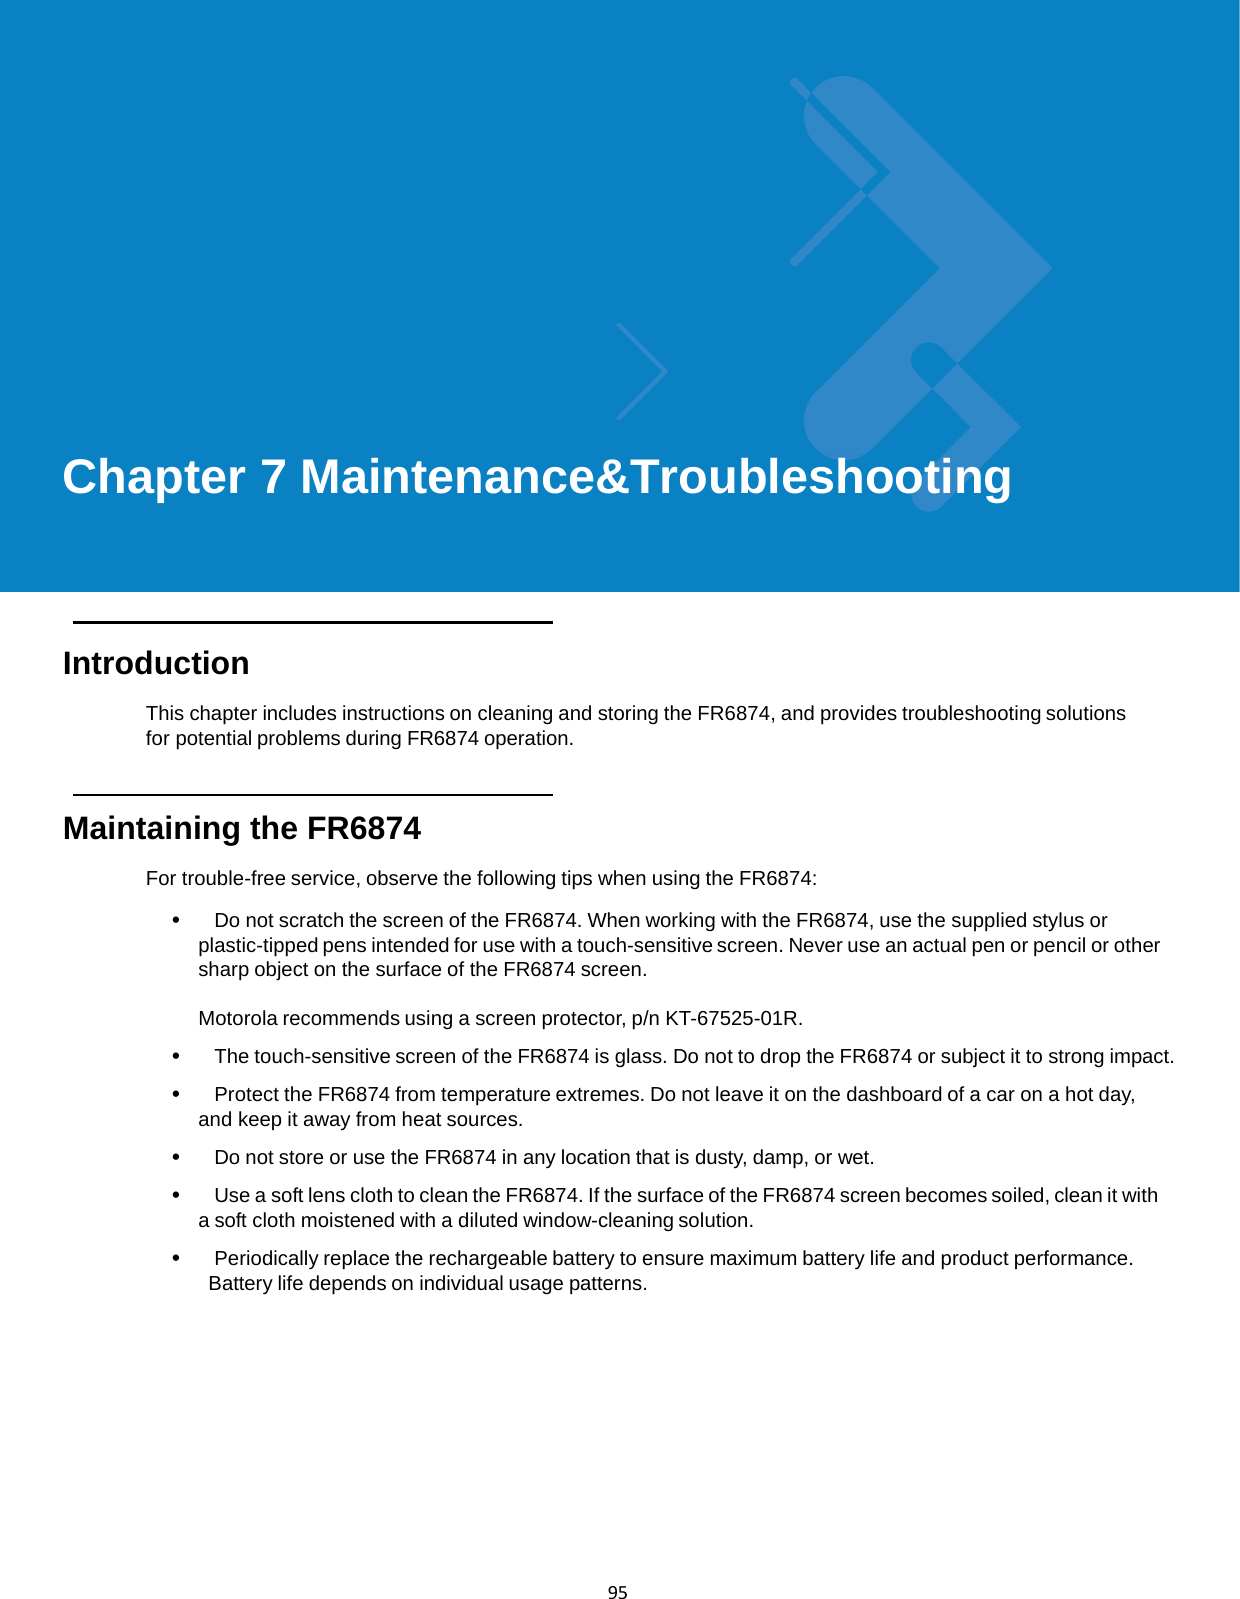  95              Chapter 7 Maintenance&amp;Troubleshooting       Introduction  This chapter includes instructions on cleaning and storing the FR6874, and provides troubleshooting solutions for potential problems during FR6874 operation.    Maintaining the FR6874  For trouble-free service, observe the following tips when using the FR6874:  •   Do not scratch the screen of the FR6874. When working with the FR6874, use the supplied stylus or plastic-tipped pens intended for use with a touch-sensitive screen. Never use an actual pen or pencil or other sharp object on the surface of the FR6874 screen.  Motorola recommends using a screen protector, p/n KT-67525-01R.  •   The touch-sensitive screen of the FR6874 is glass. Do not to drop the FR6874 or subject it to strong impact.  •   Protect the FR6874 from temperature extremes. Do not leave it on the dashboard of a car on a hot day, and keep it away from heat sources.  •   Do not store or use the FR6874 in any location that is dusty, damp, or wet.  •   Use a soft lens cloth to clean the FR6874. If the surface of the FR6874 screen becomes soiled, clean it with a soft cloth moistened with a diluted window-cleaning solution.  •   Periodically replace the rechargeable battery to ensure maximum battery life and product performance. Battery life depends on individual usage patterns. 